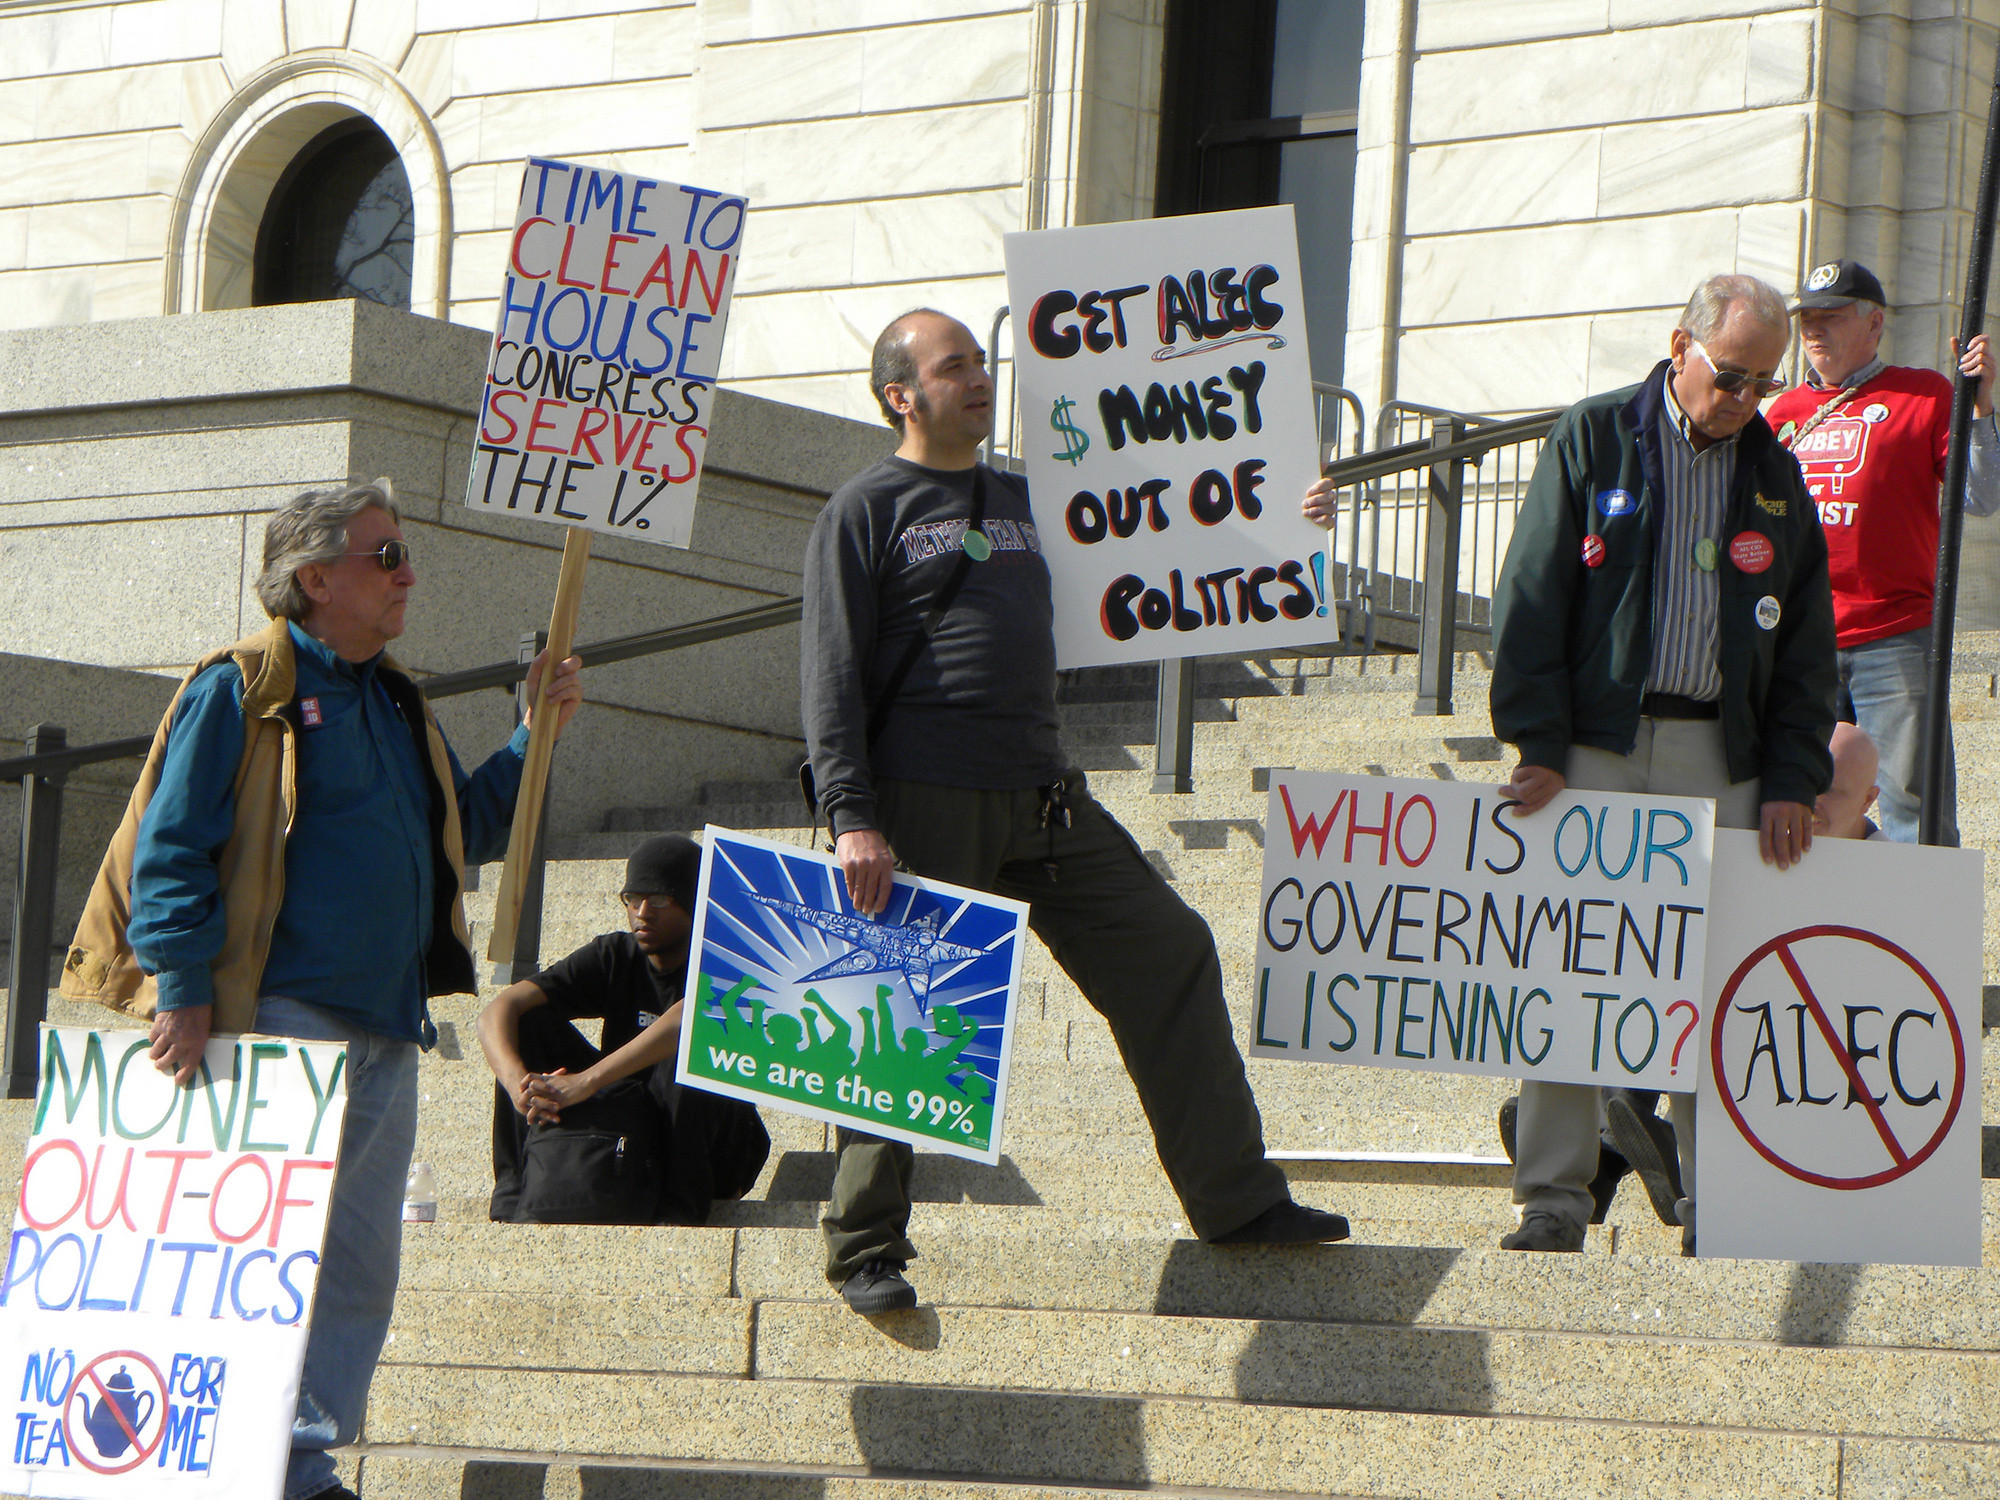 Protest against ALEC by the Occupy movement and other groups, St. Paul, Minnesota, March 13, 2012. (Fibonacci Blue/Flickr/CC BY 2.0)